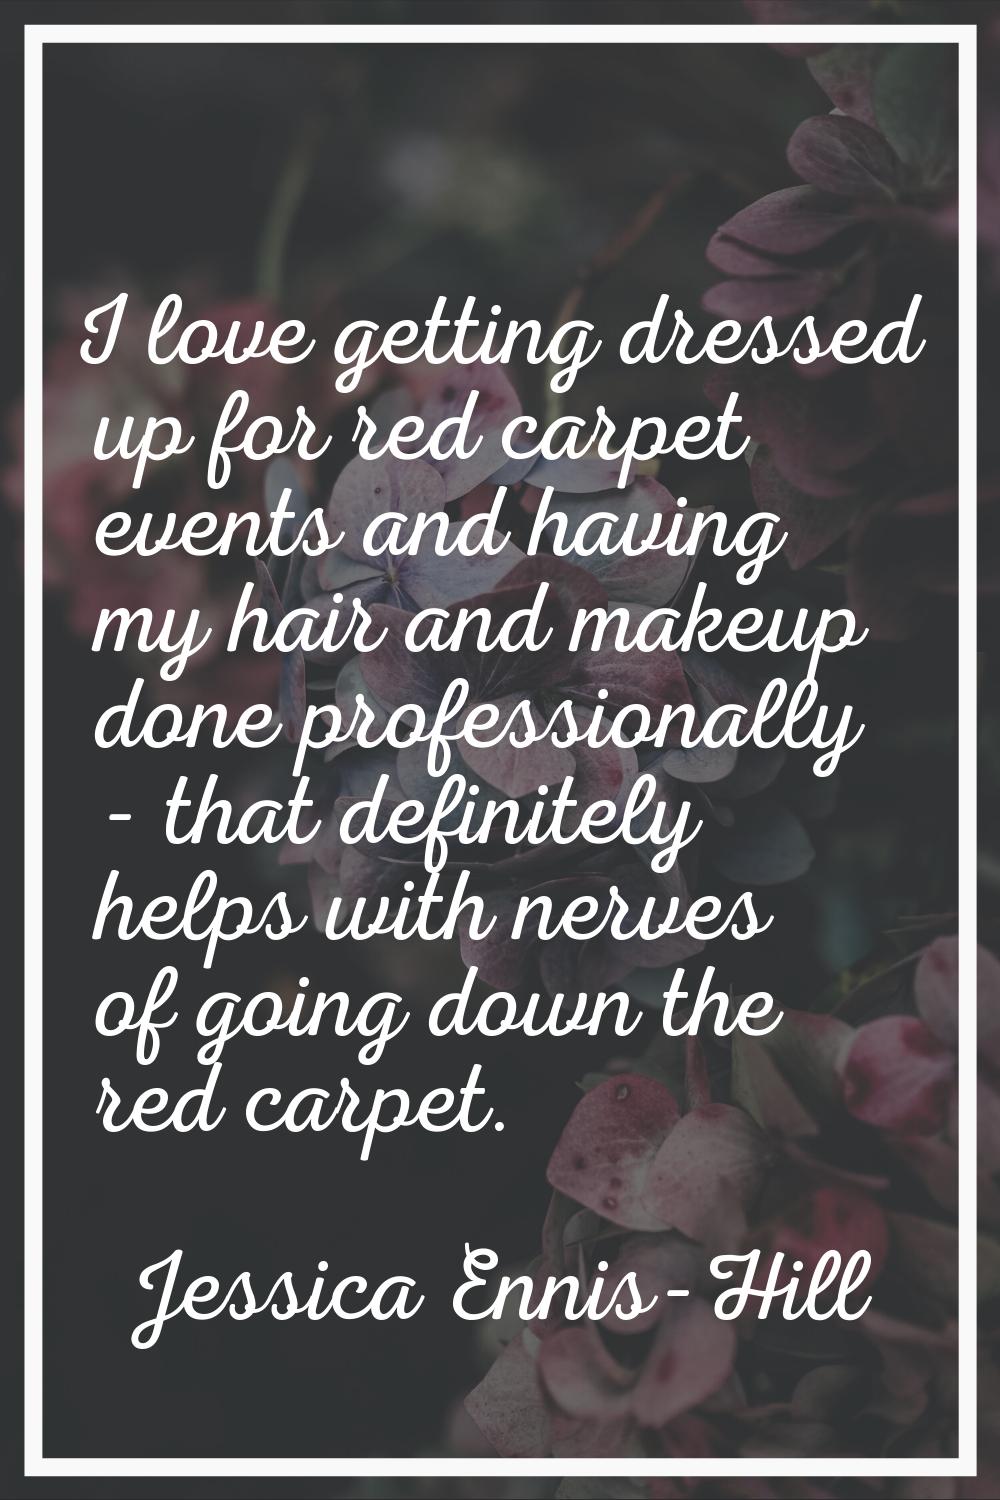 I love getting dressed up for red carpet events and having my hair and makeup done professionally -